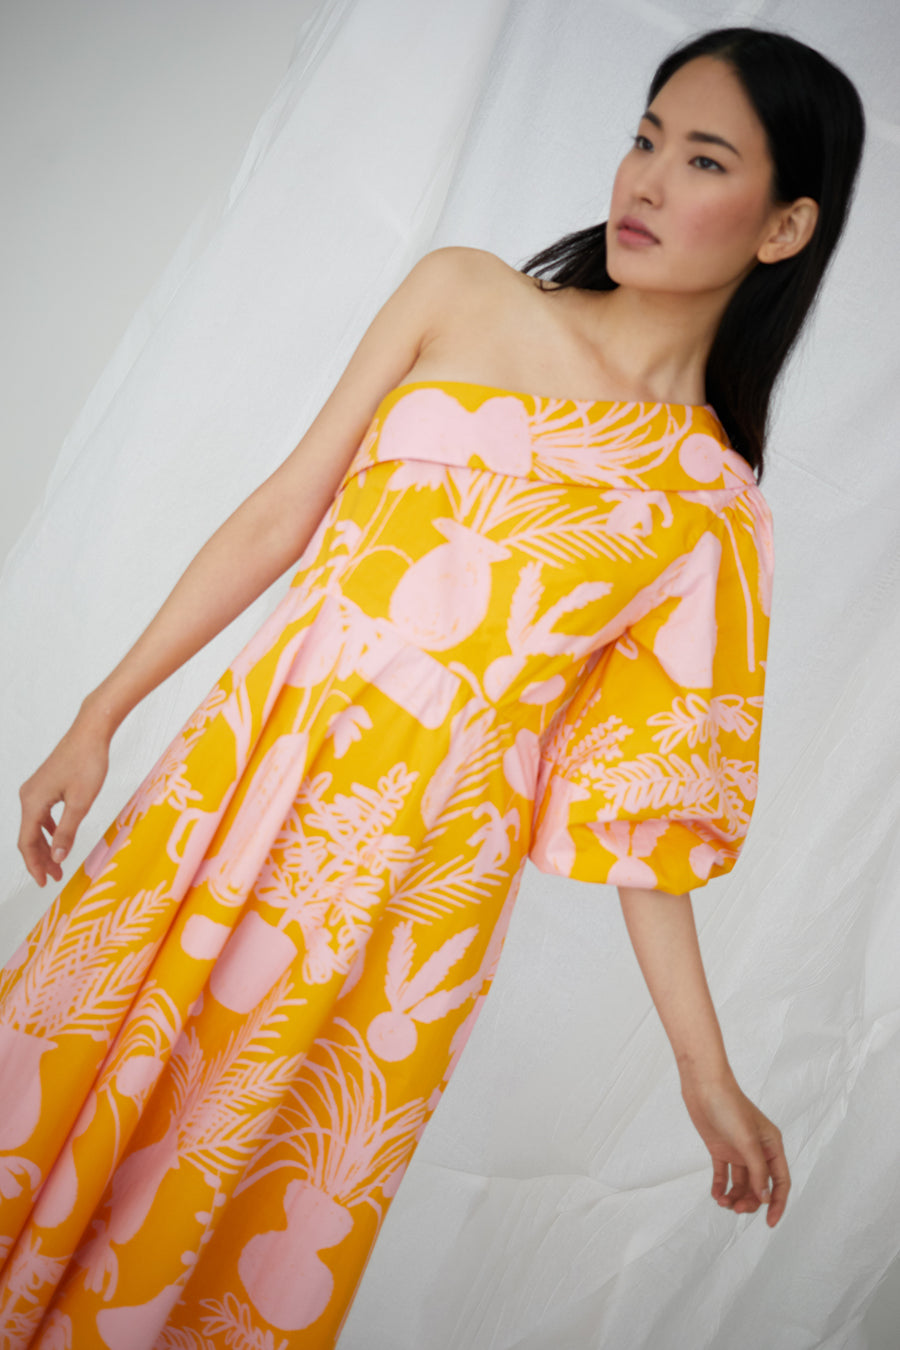 Paige Dress in Potted Plant Print Orange/Pink